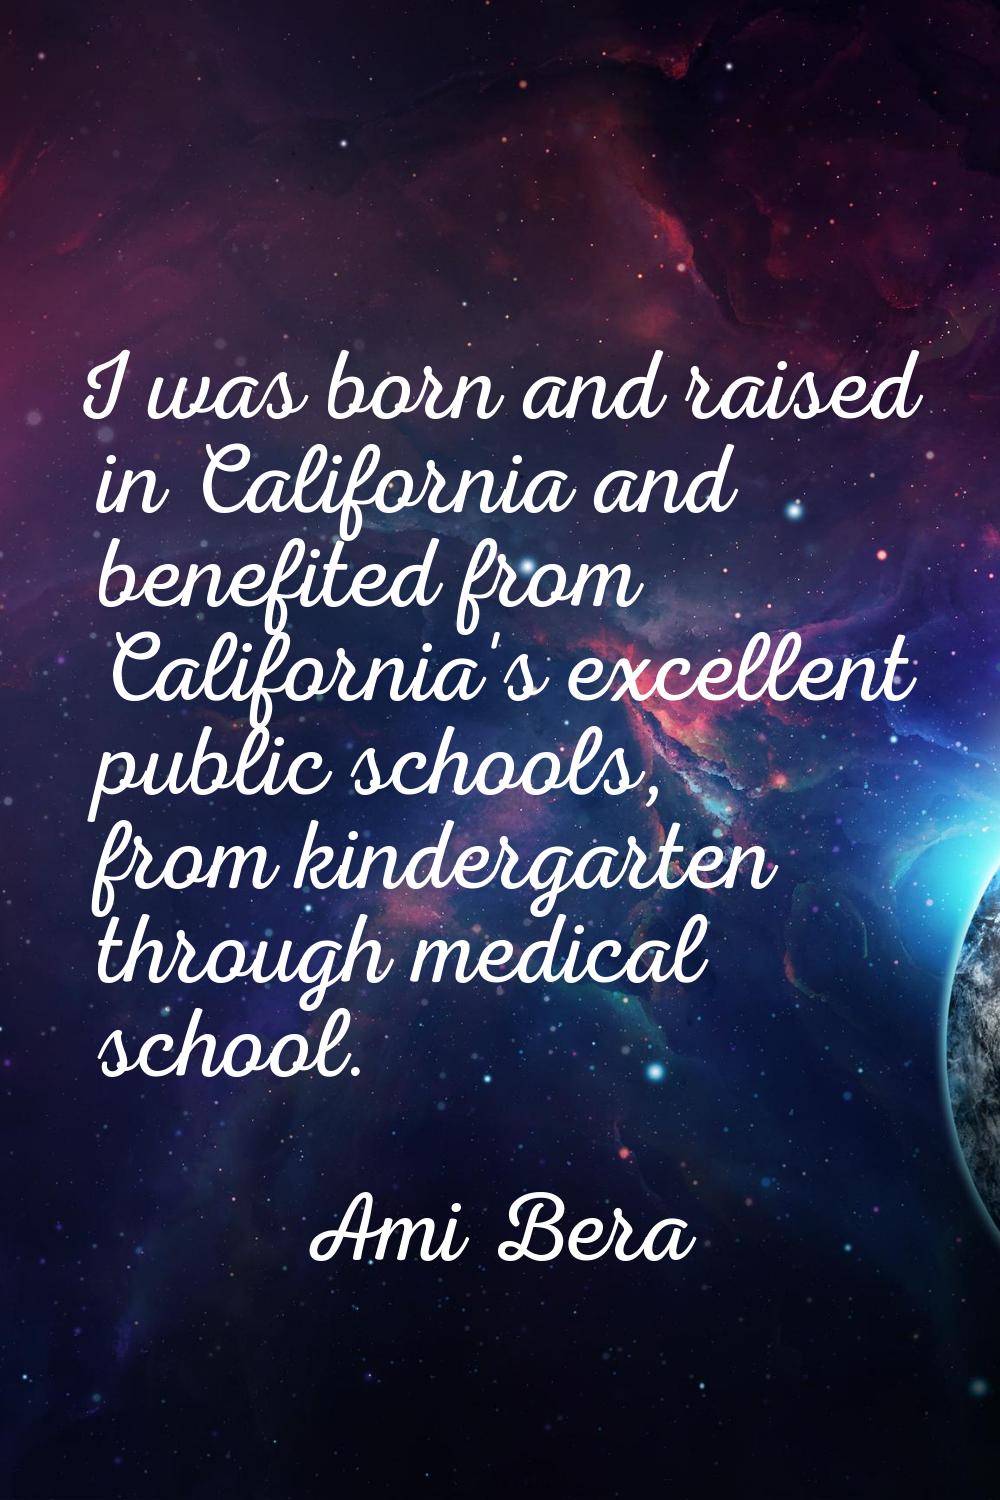 I was born and raised in California and benefited from California's excellent public schools, from 